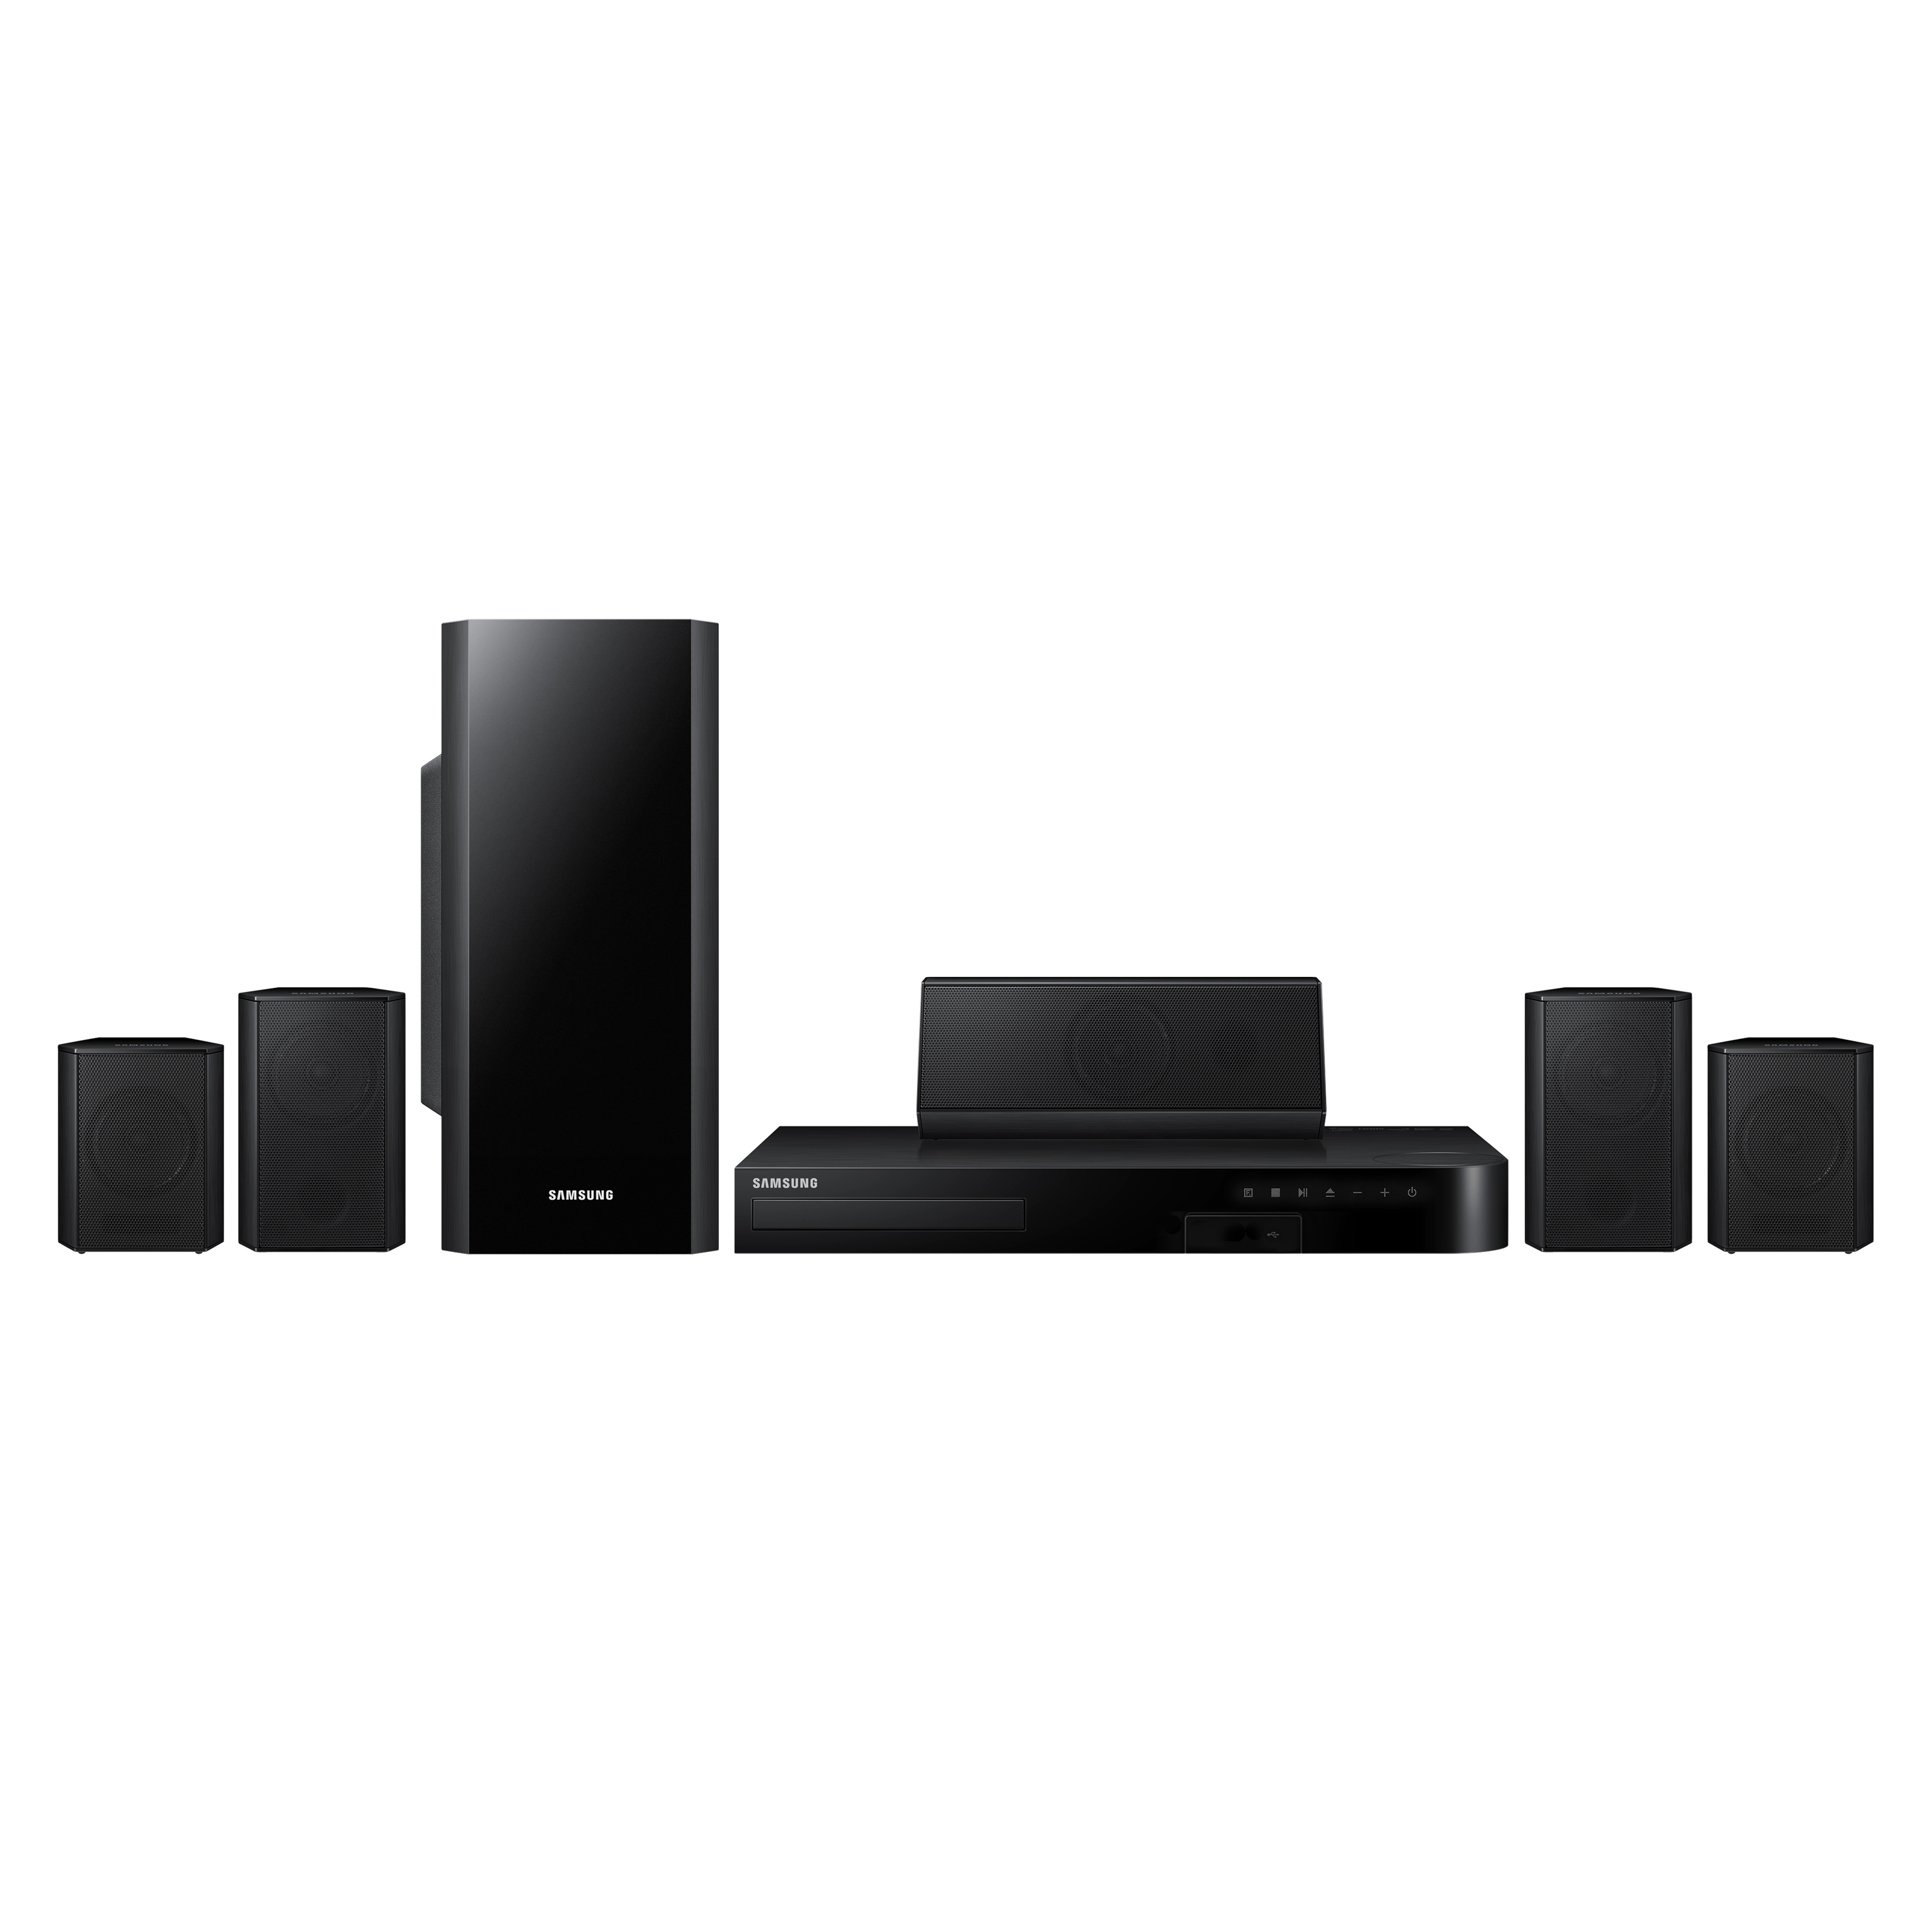 Samsung Ht-hm55 Home Theater - image 2 of 2